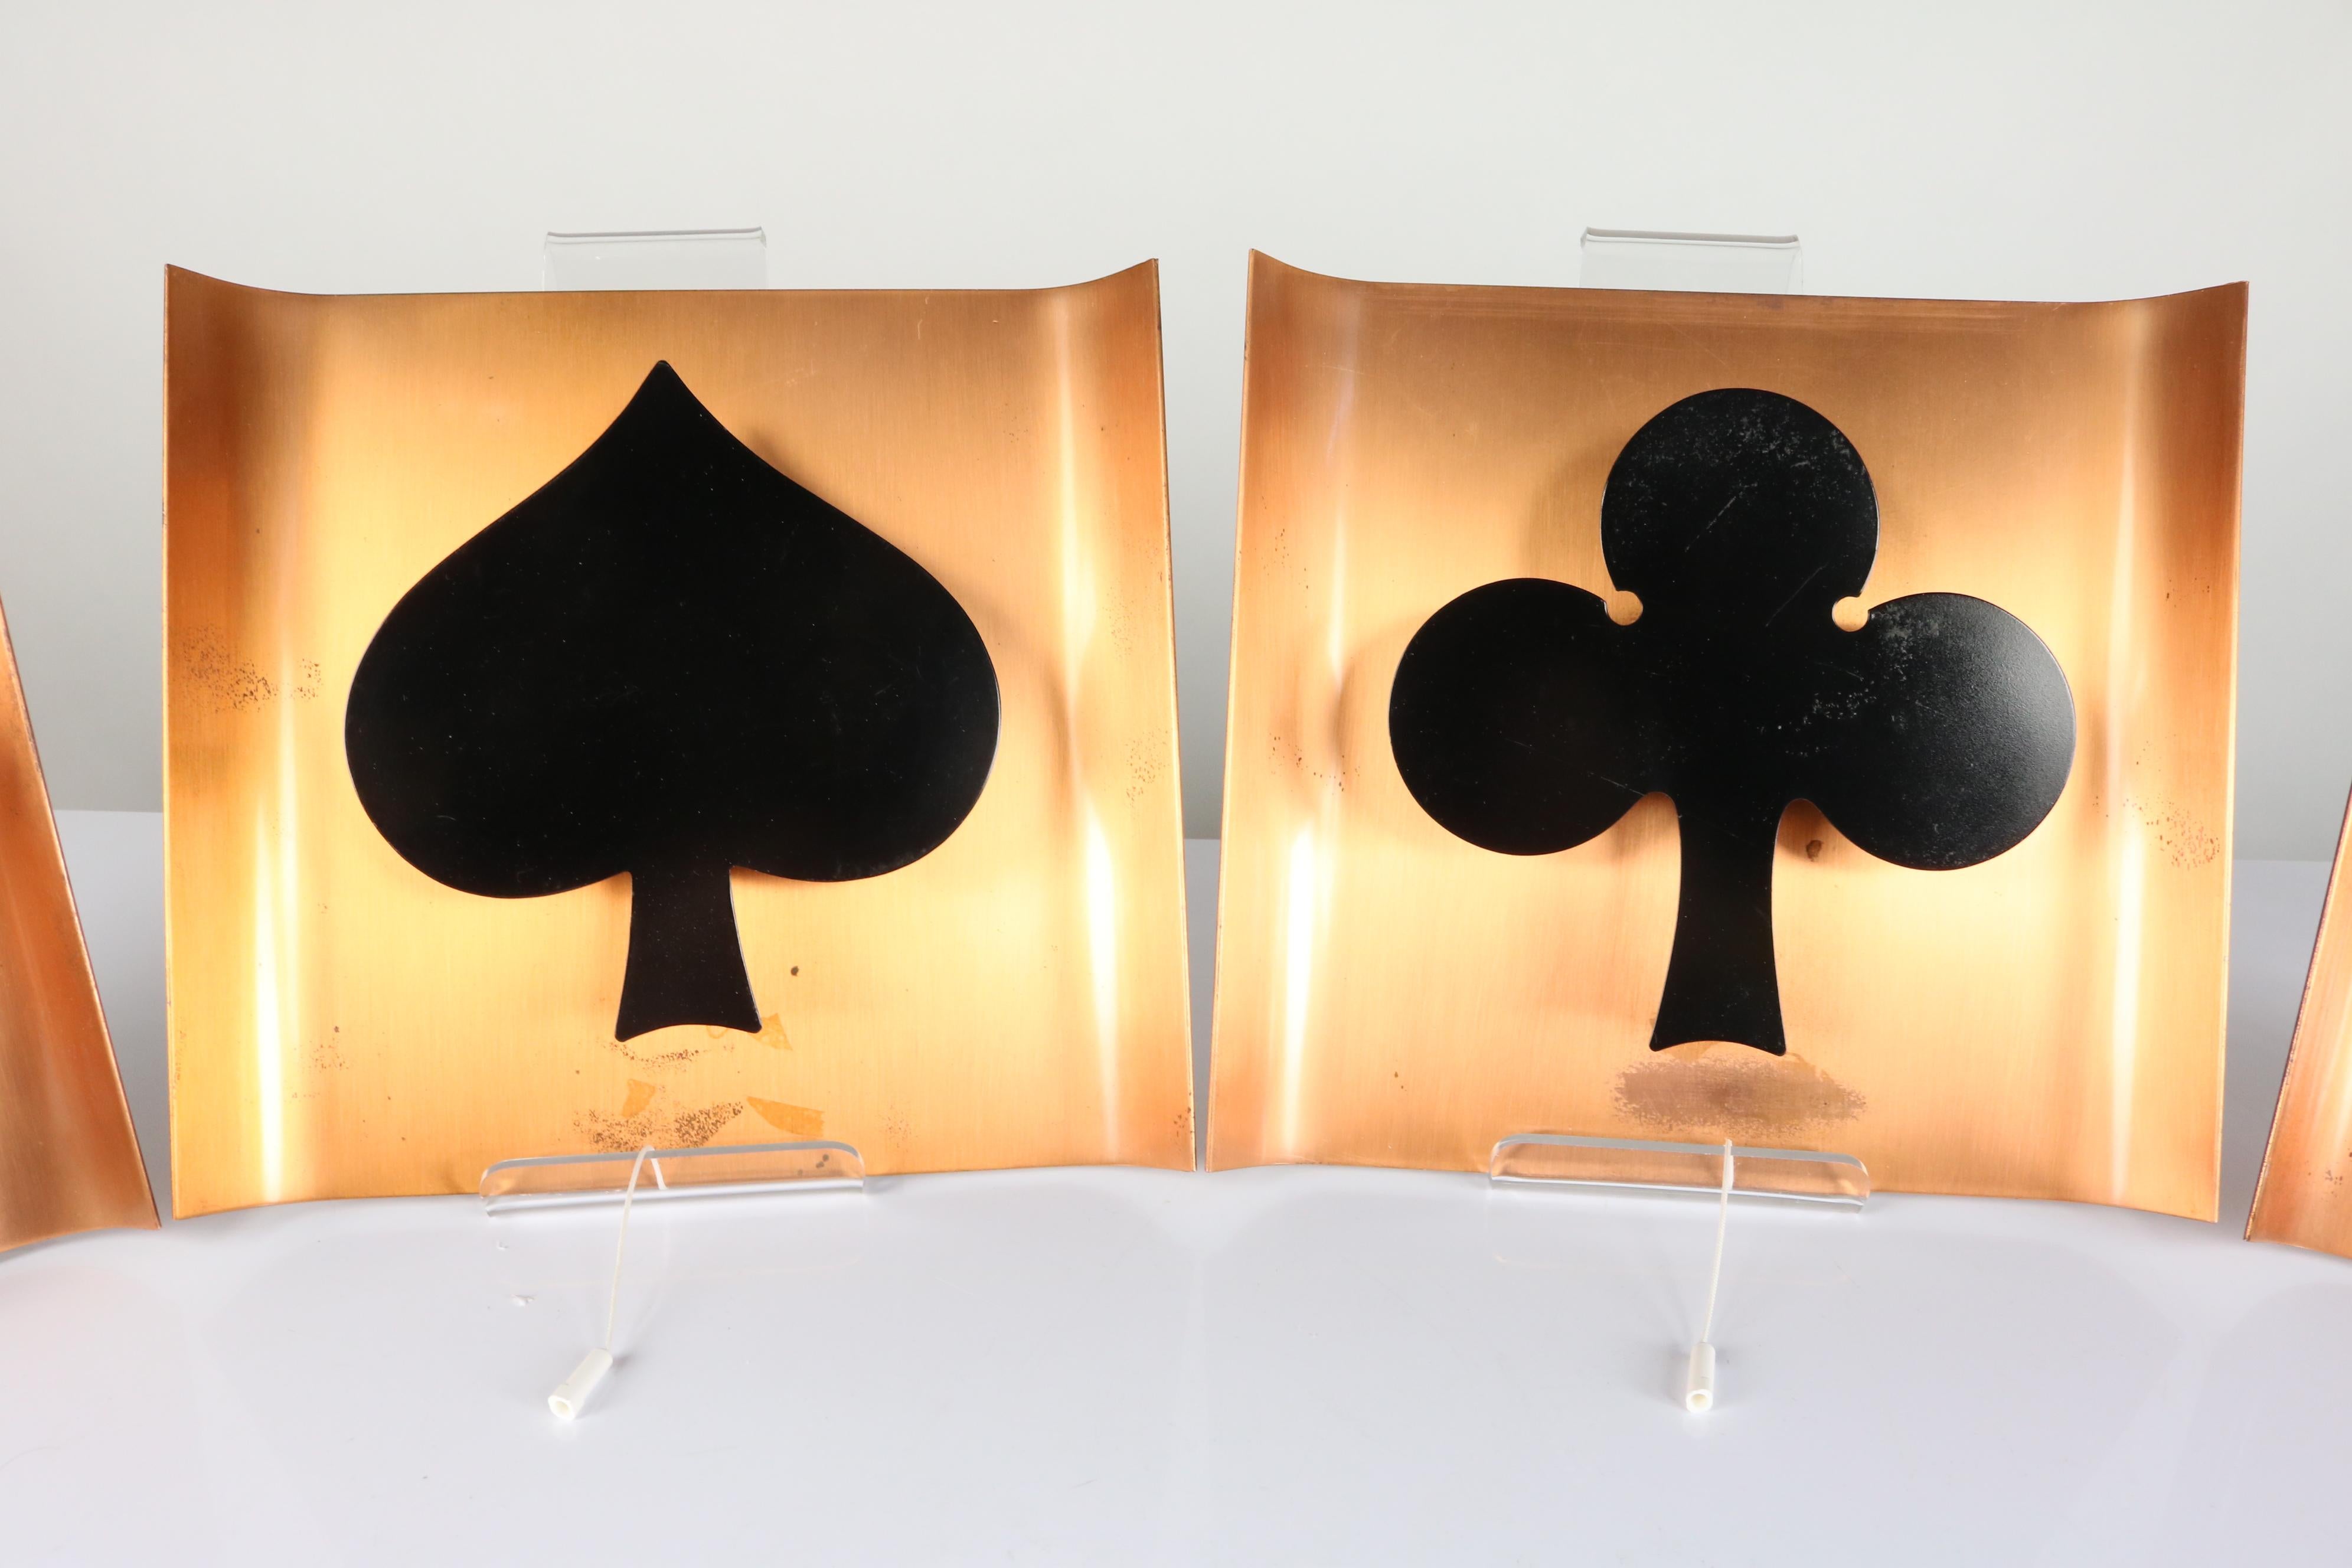 A set of four wall lamps with playing card symbols
made of copper and steel by Kaiser Leuchten Germany in the early 1960s
each lamp is equipped with a pull switch
good used condition with signs of usage and age
you need a small Edison screw bulb